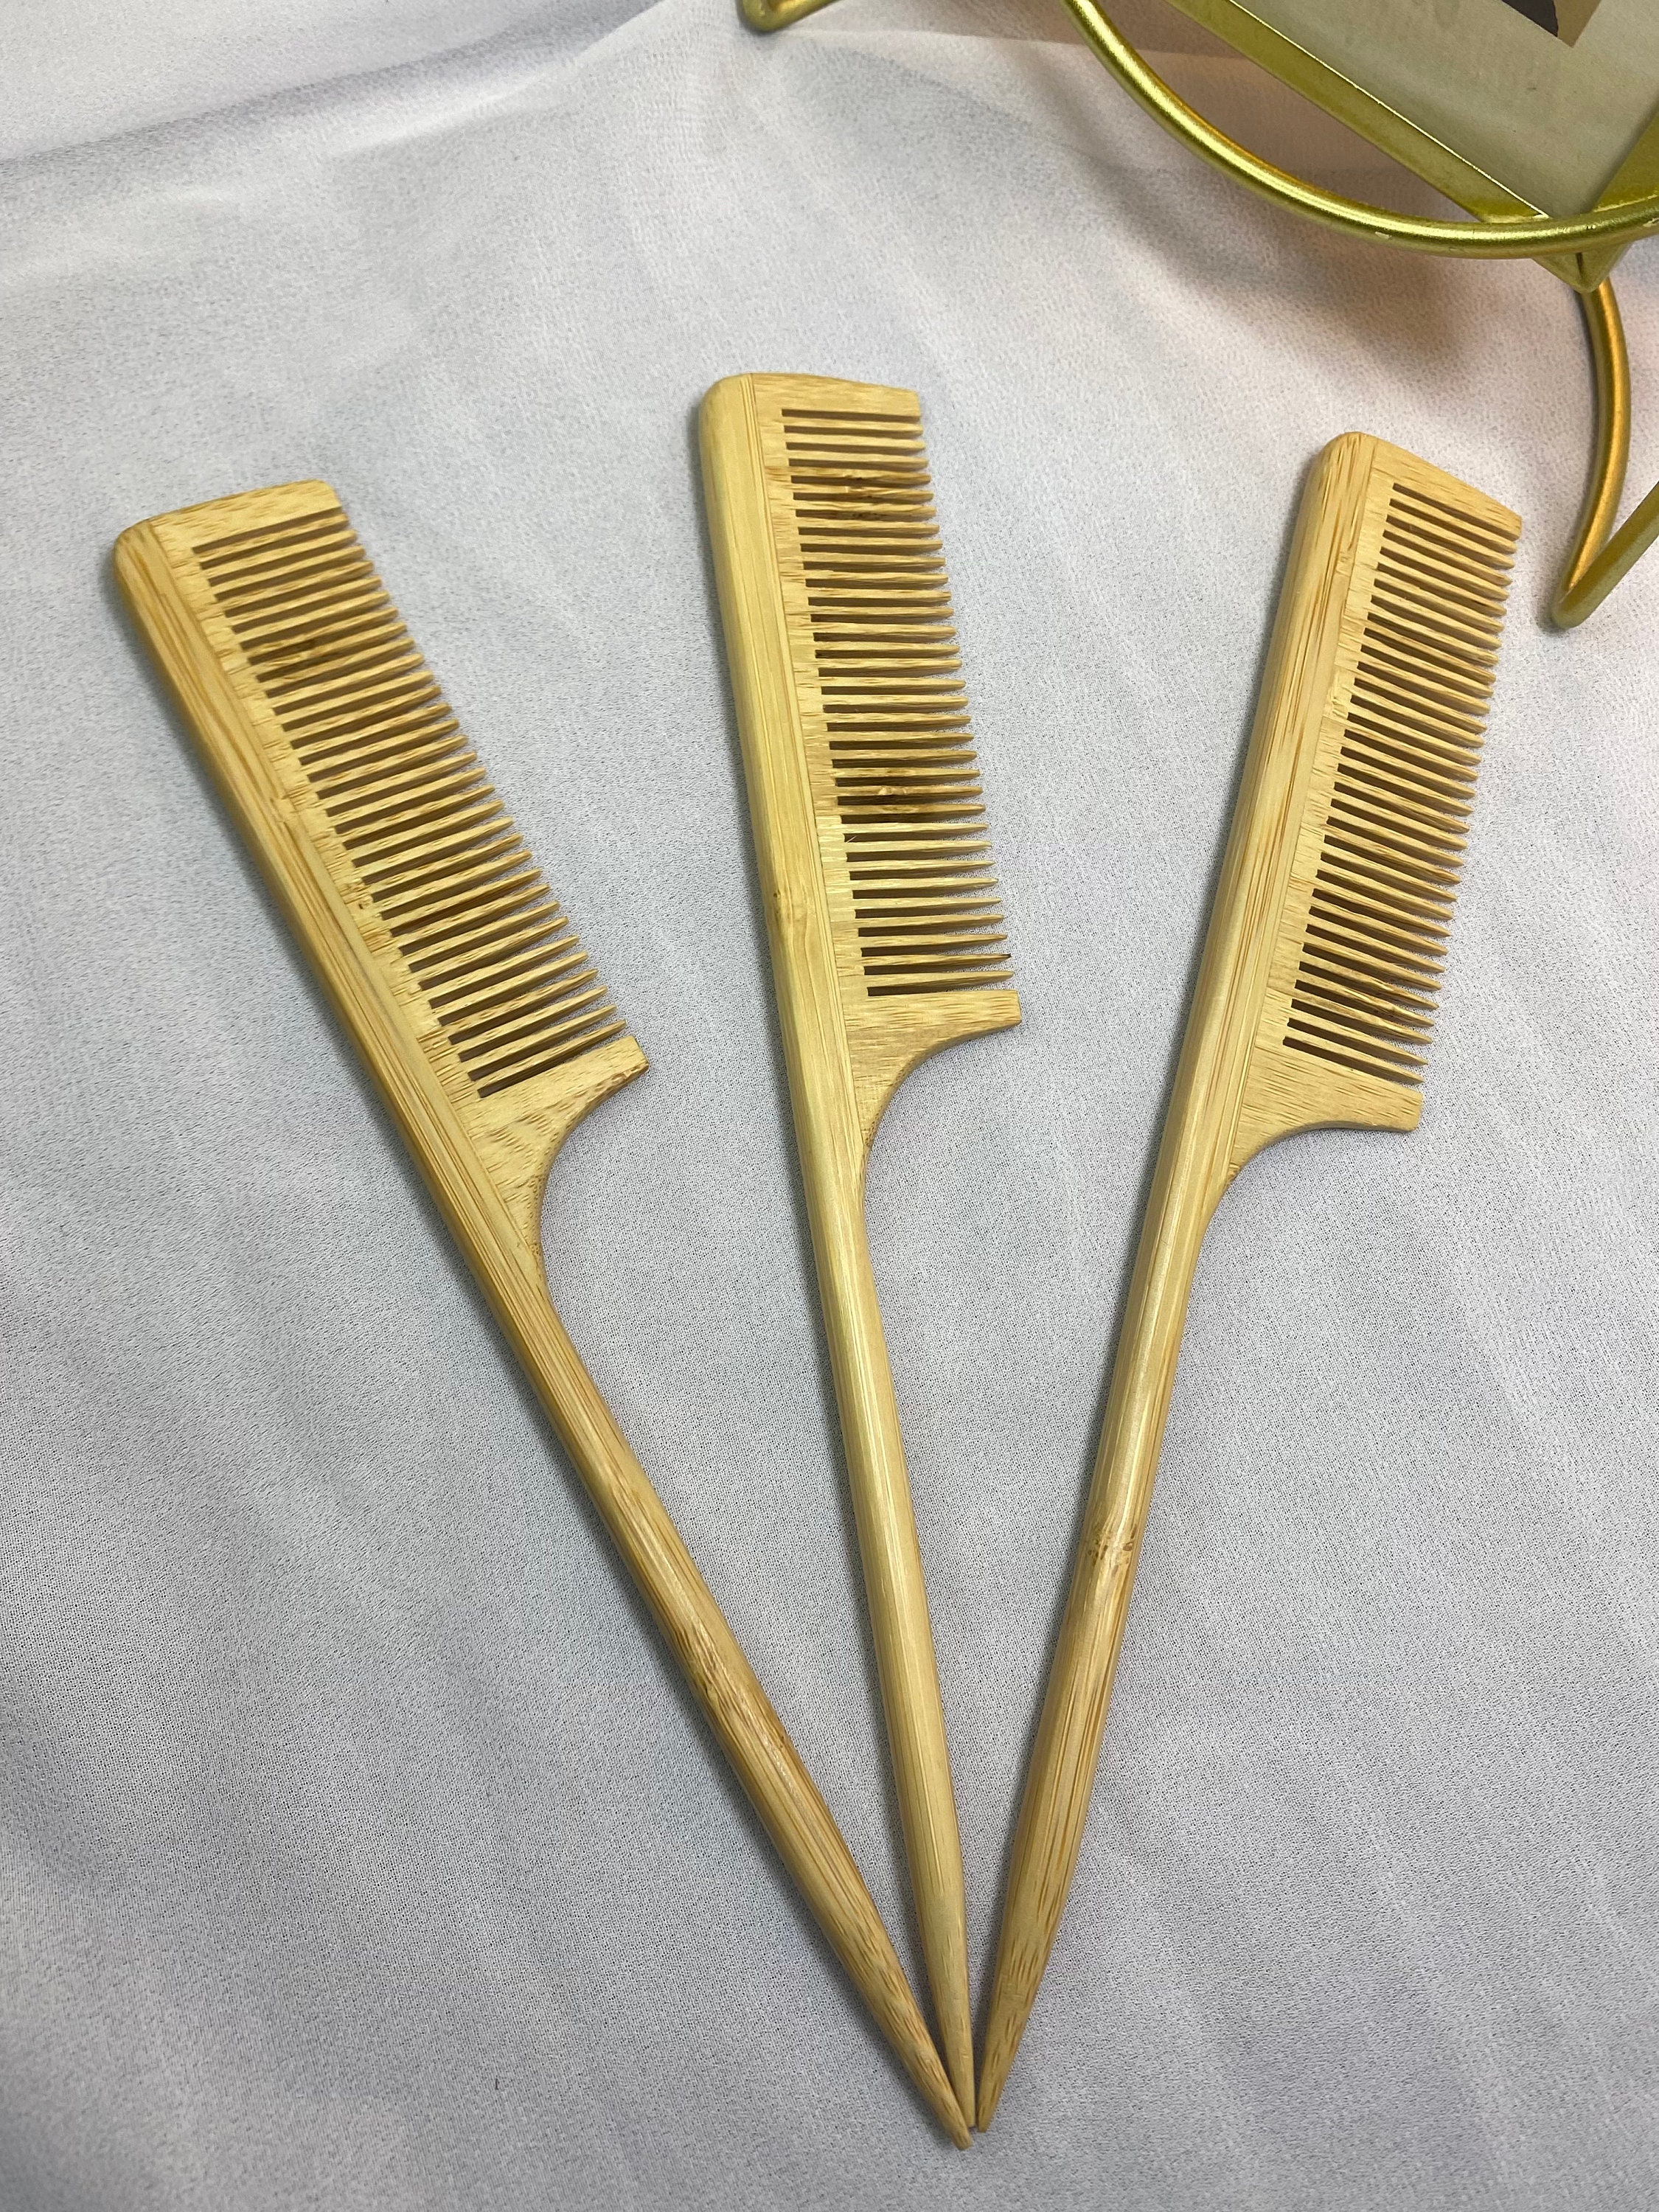 Wide Tooth Jumbo Wooden Bamboo Comb-Limited Edition – Kriya Botanicals